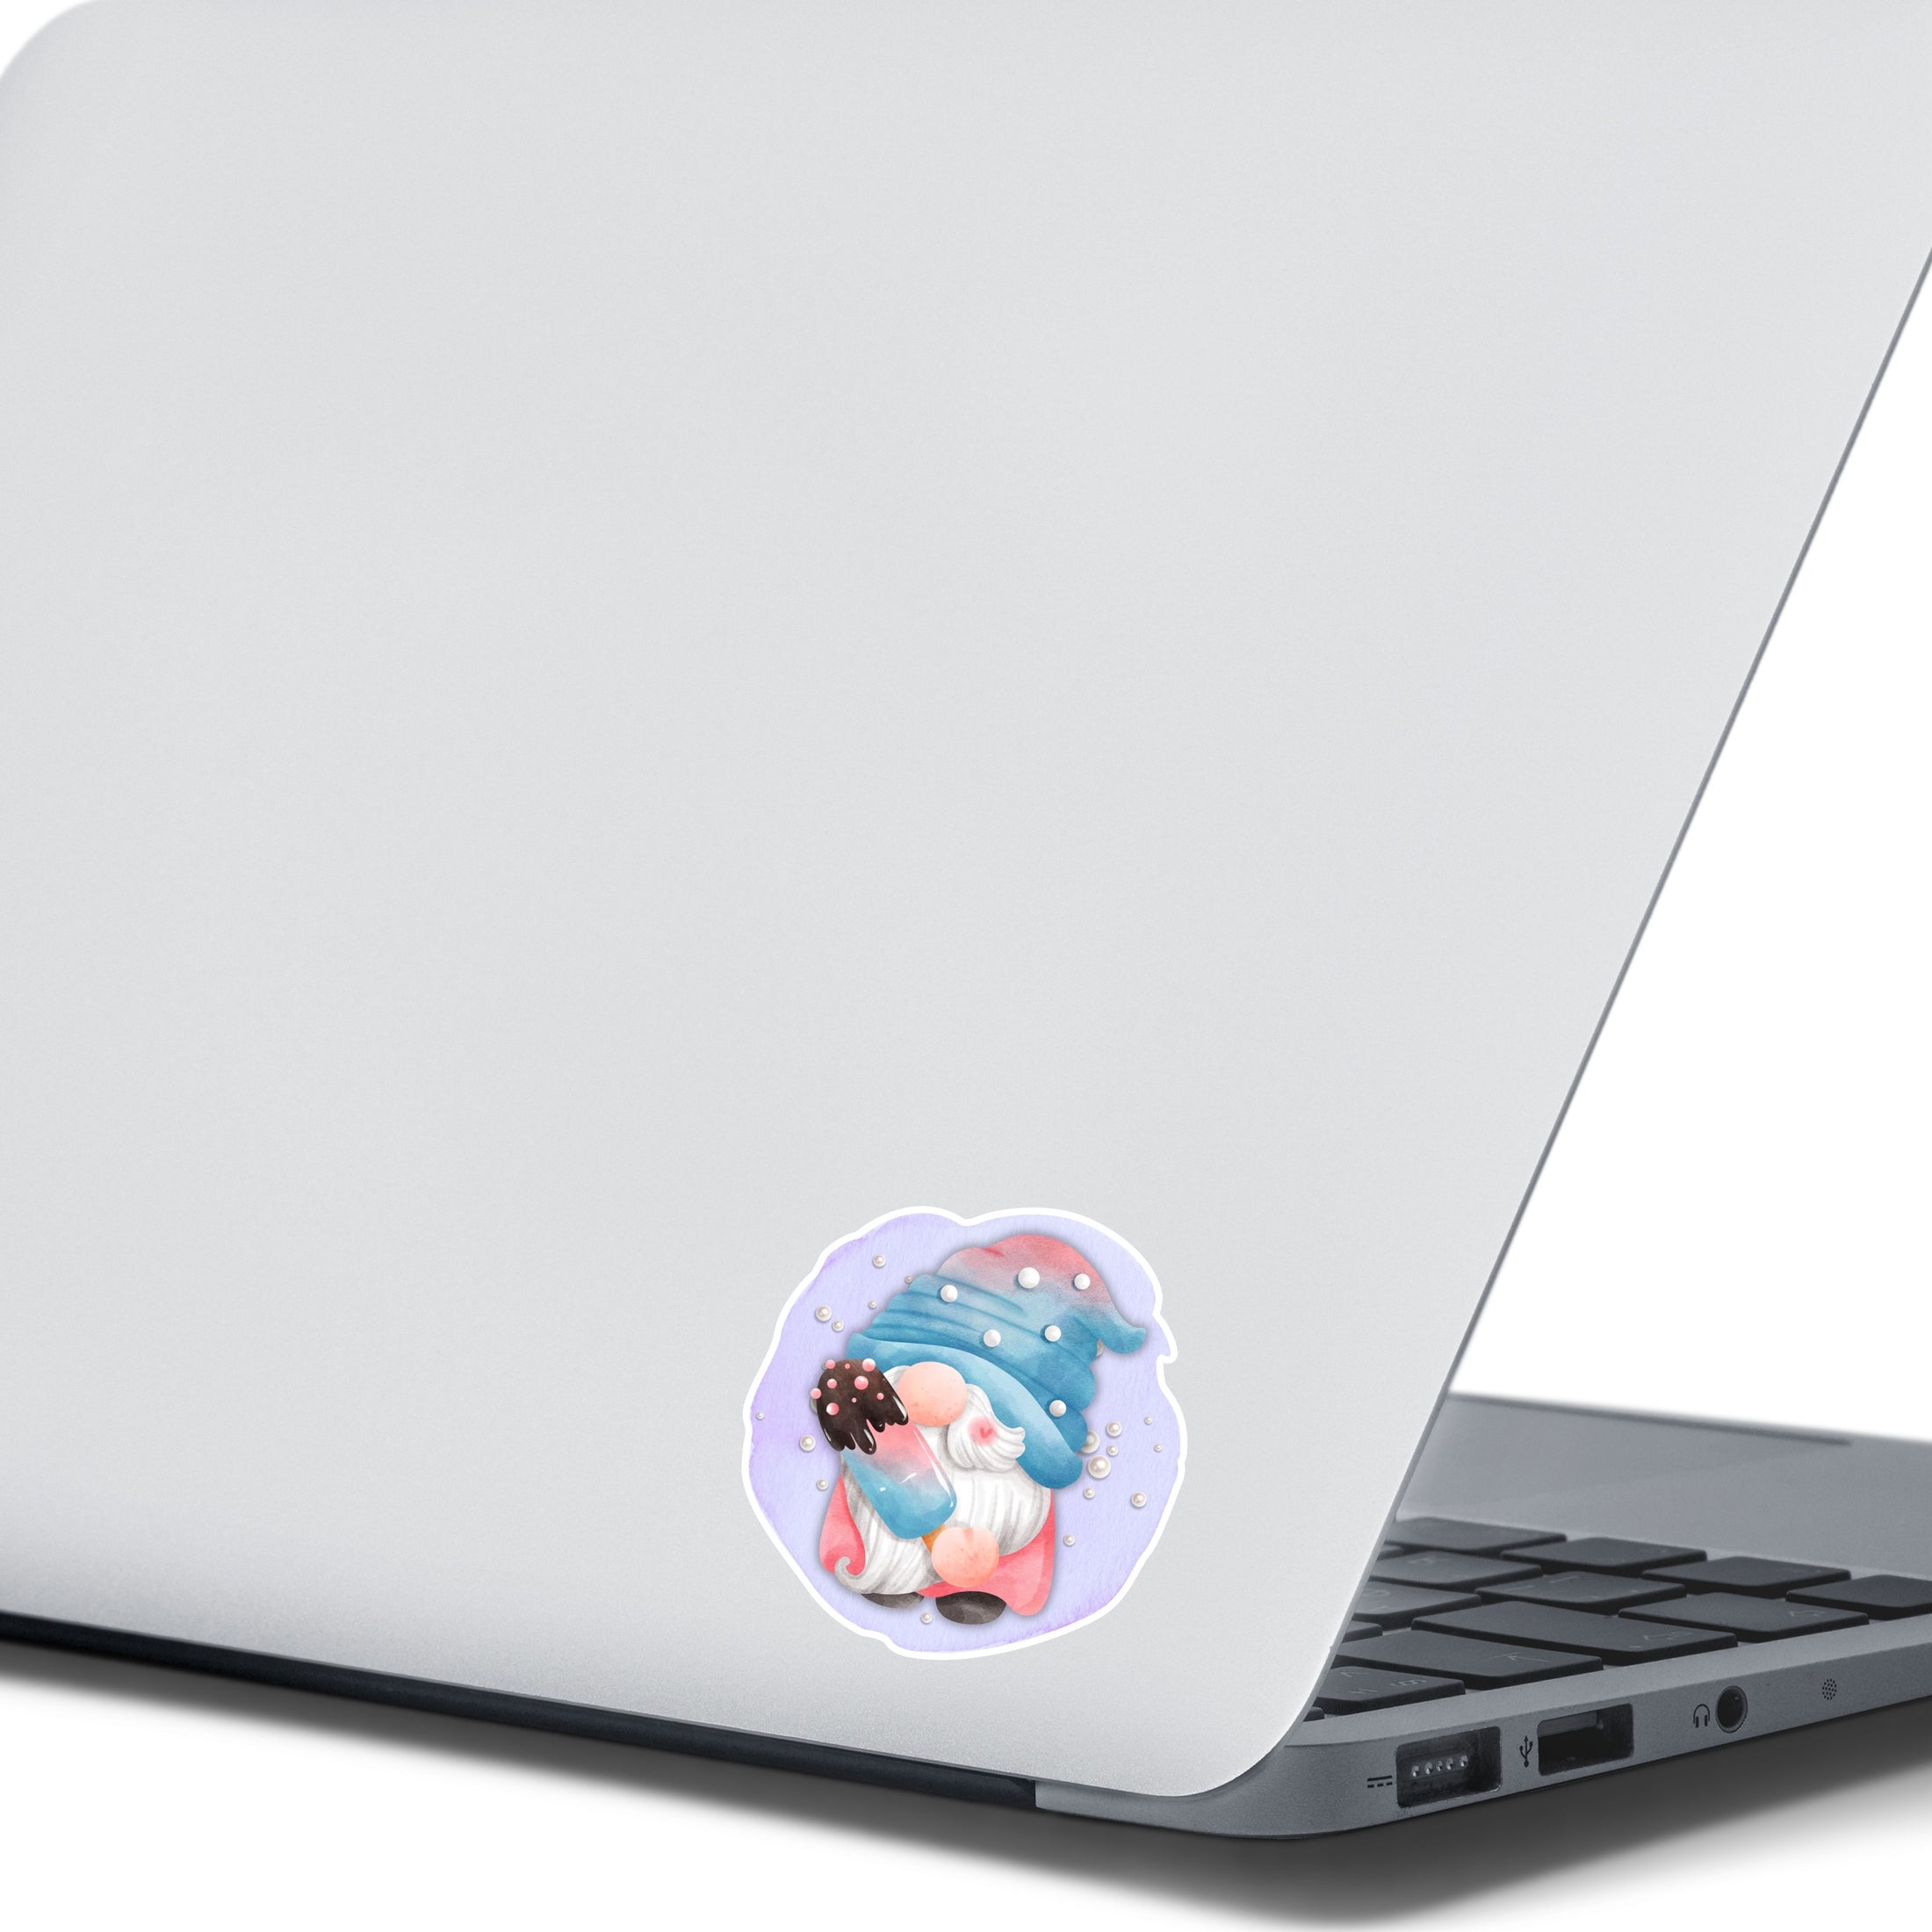 This image shows the gnome with a popsicle on the back of an open laptop.